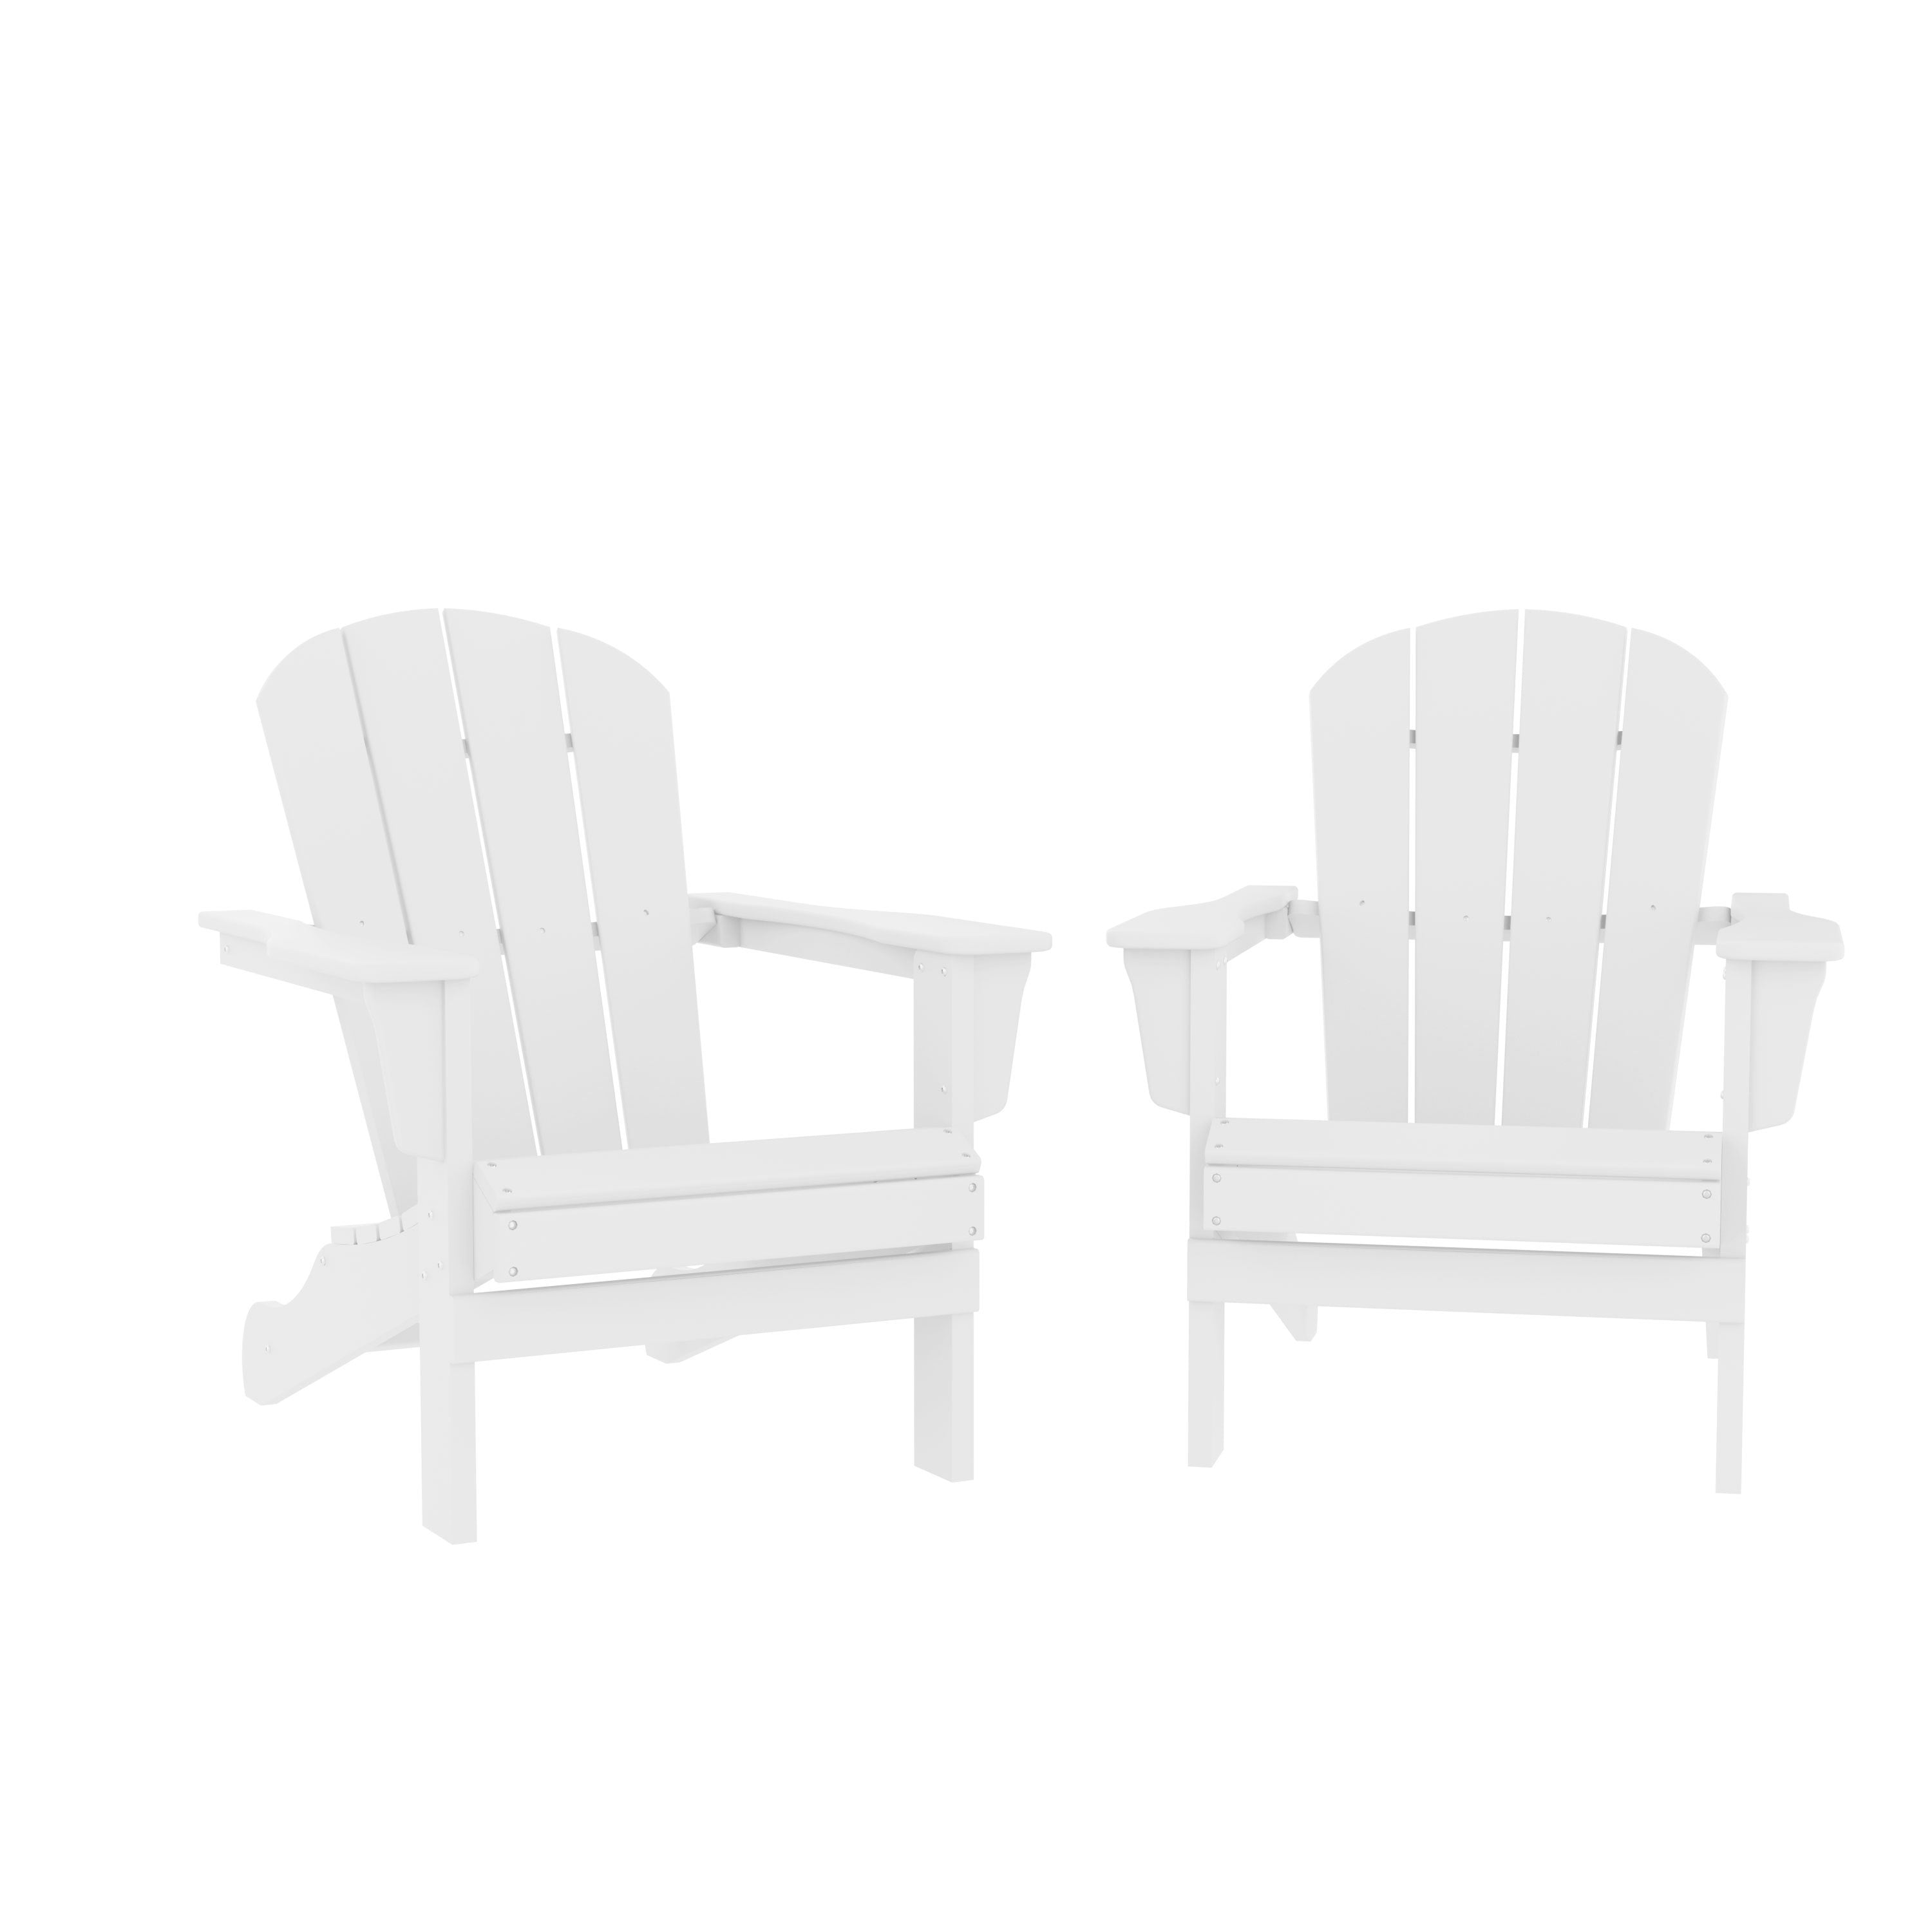 HDPE Adirondack Chair Terrace Outdoor Chair Set of 2 (White)